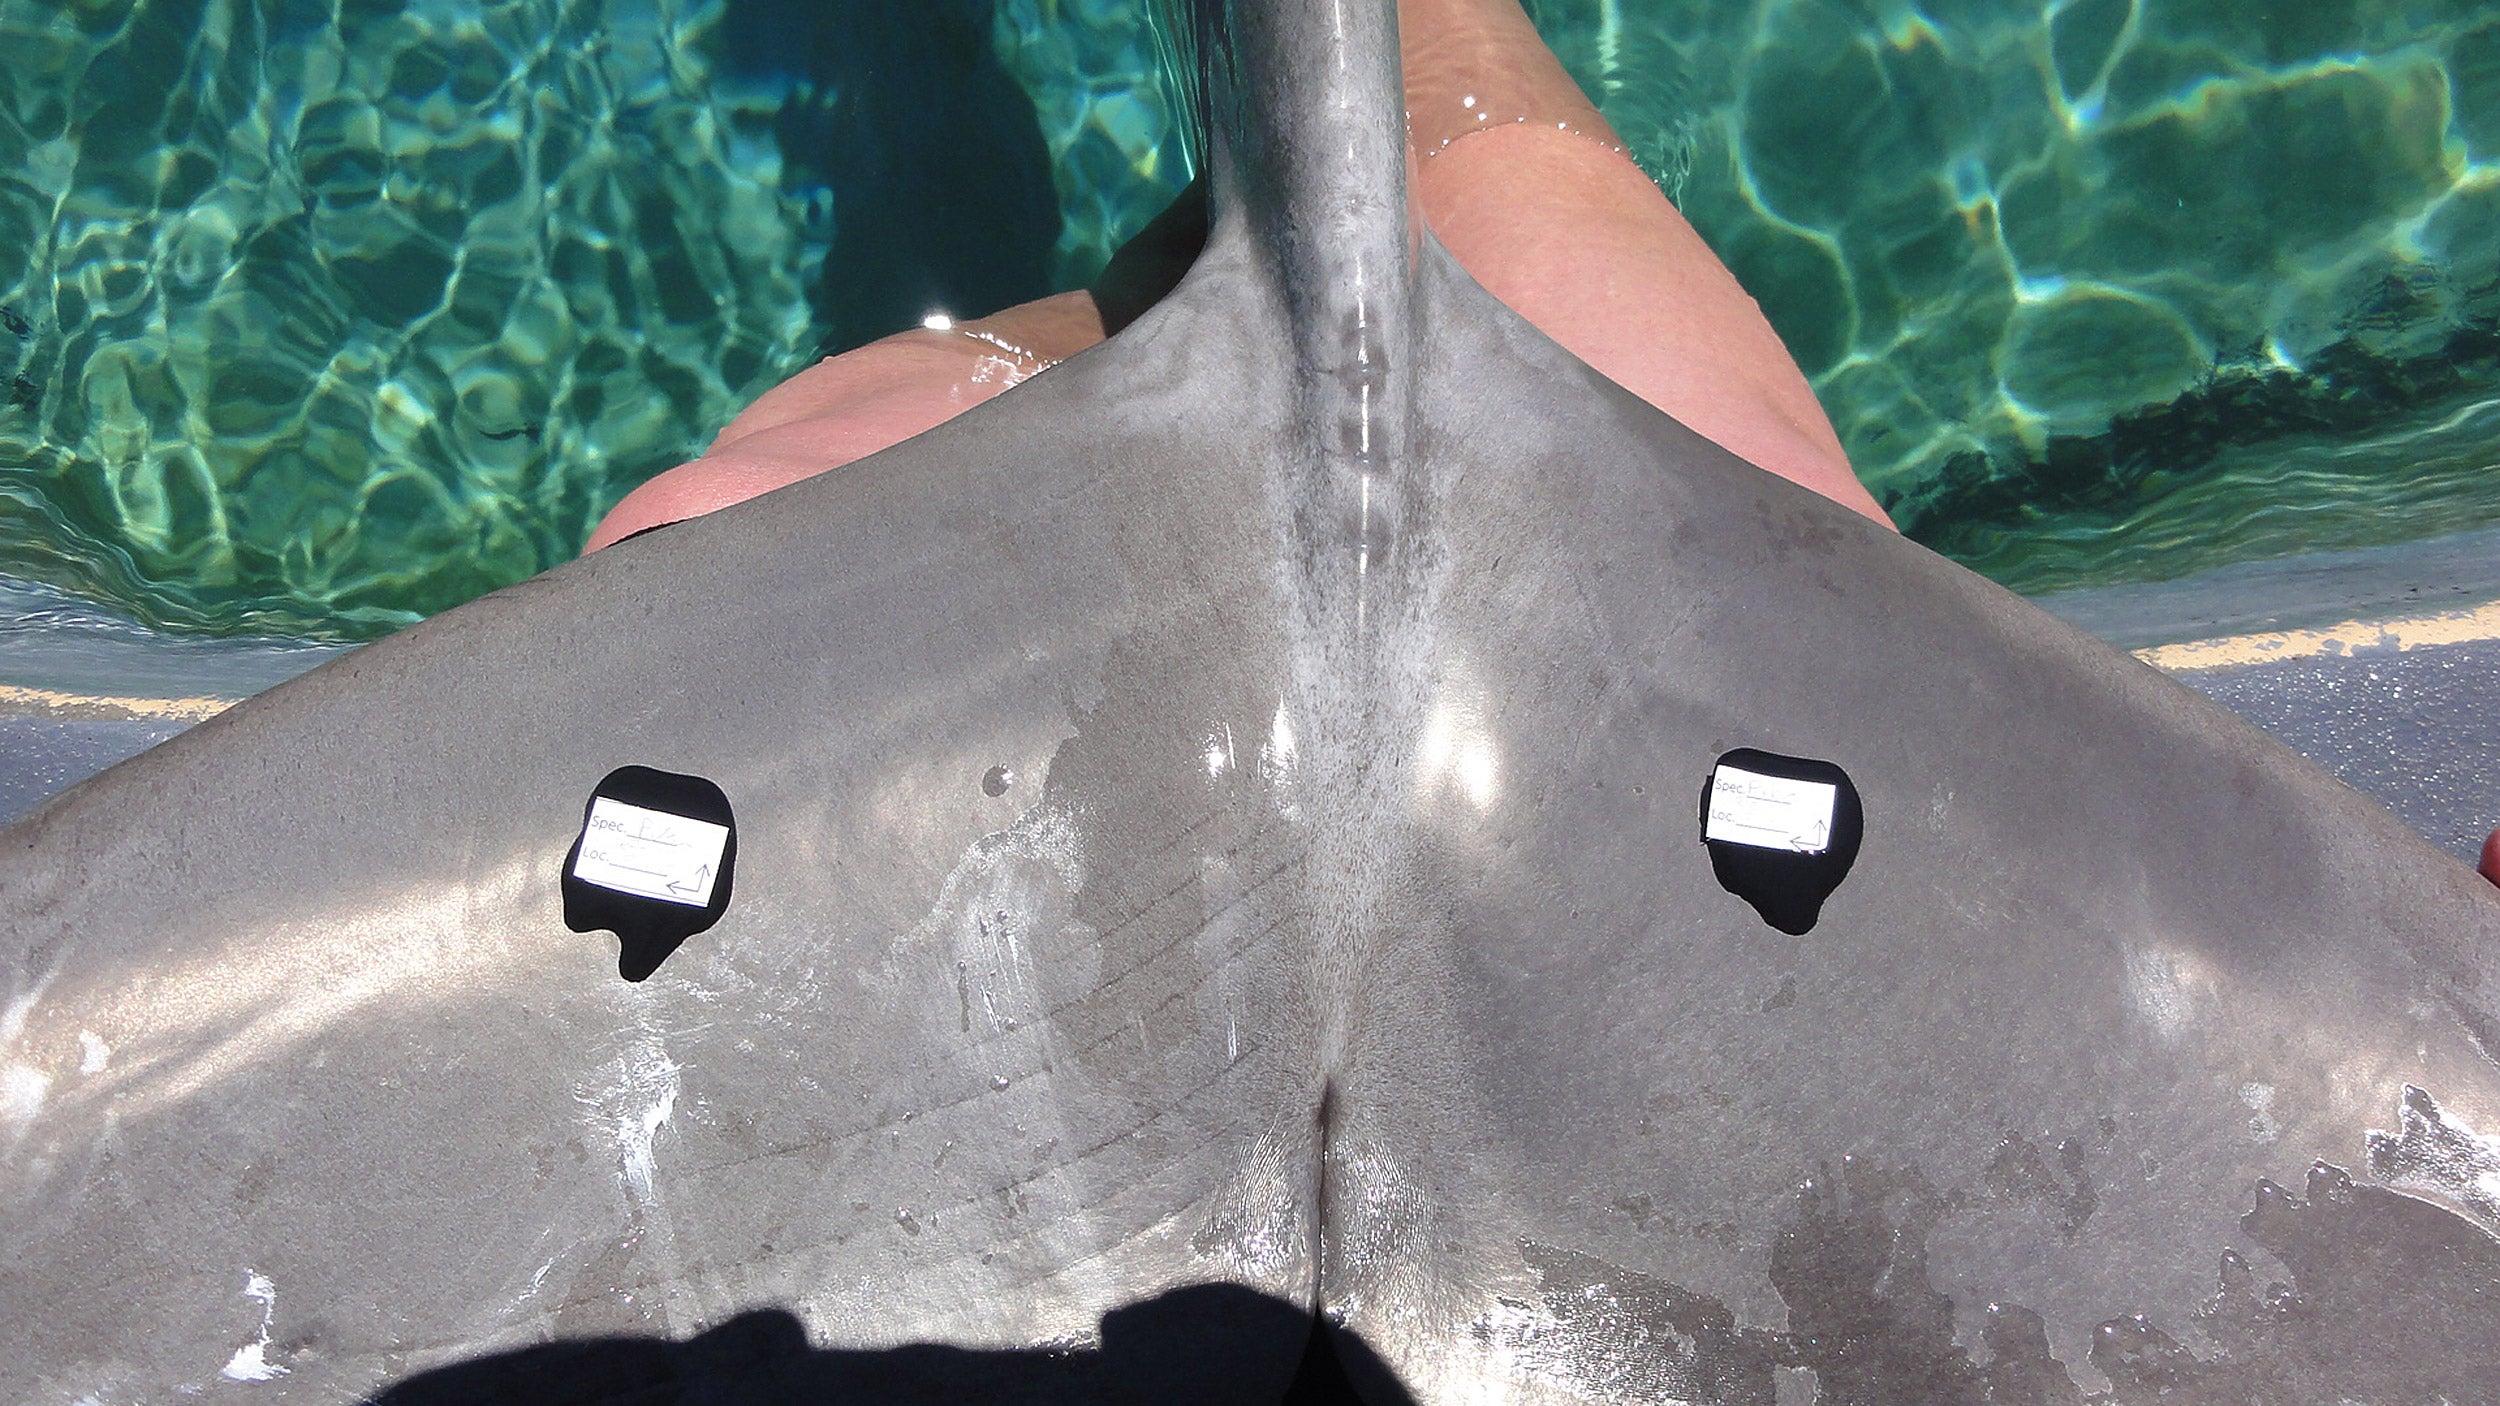 molding compound on tail of dolphin